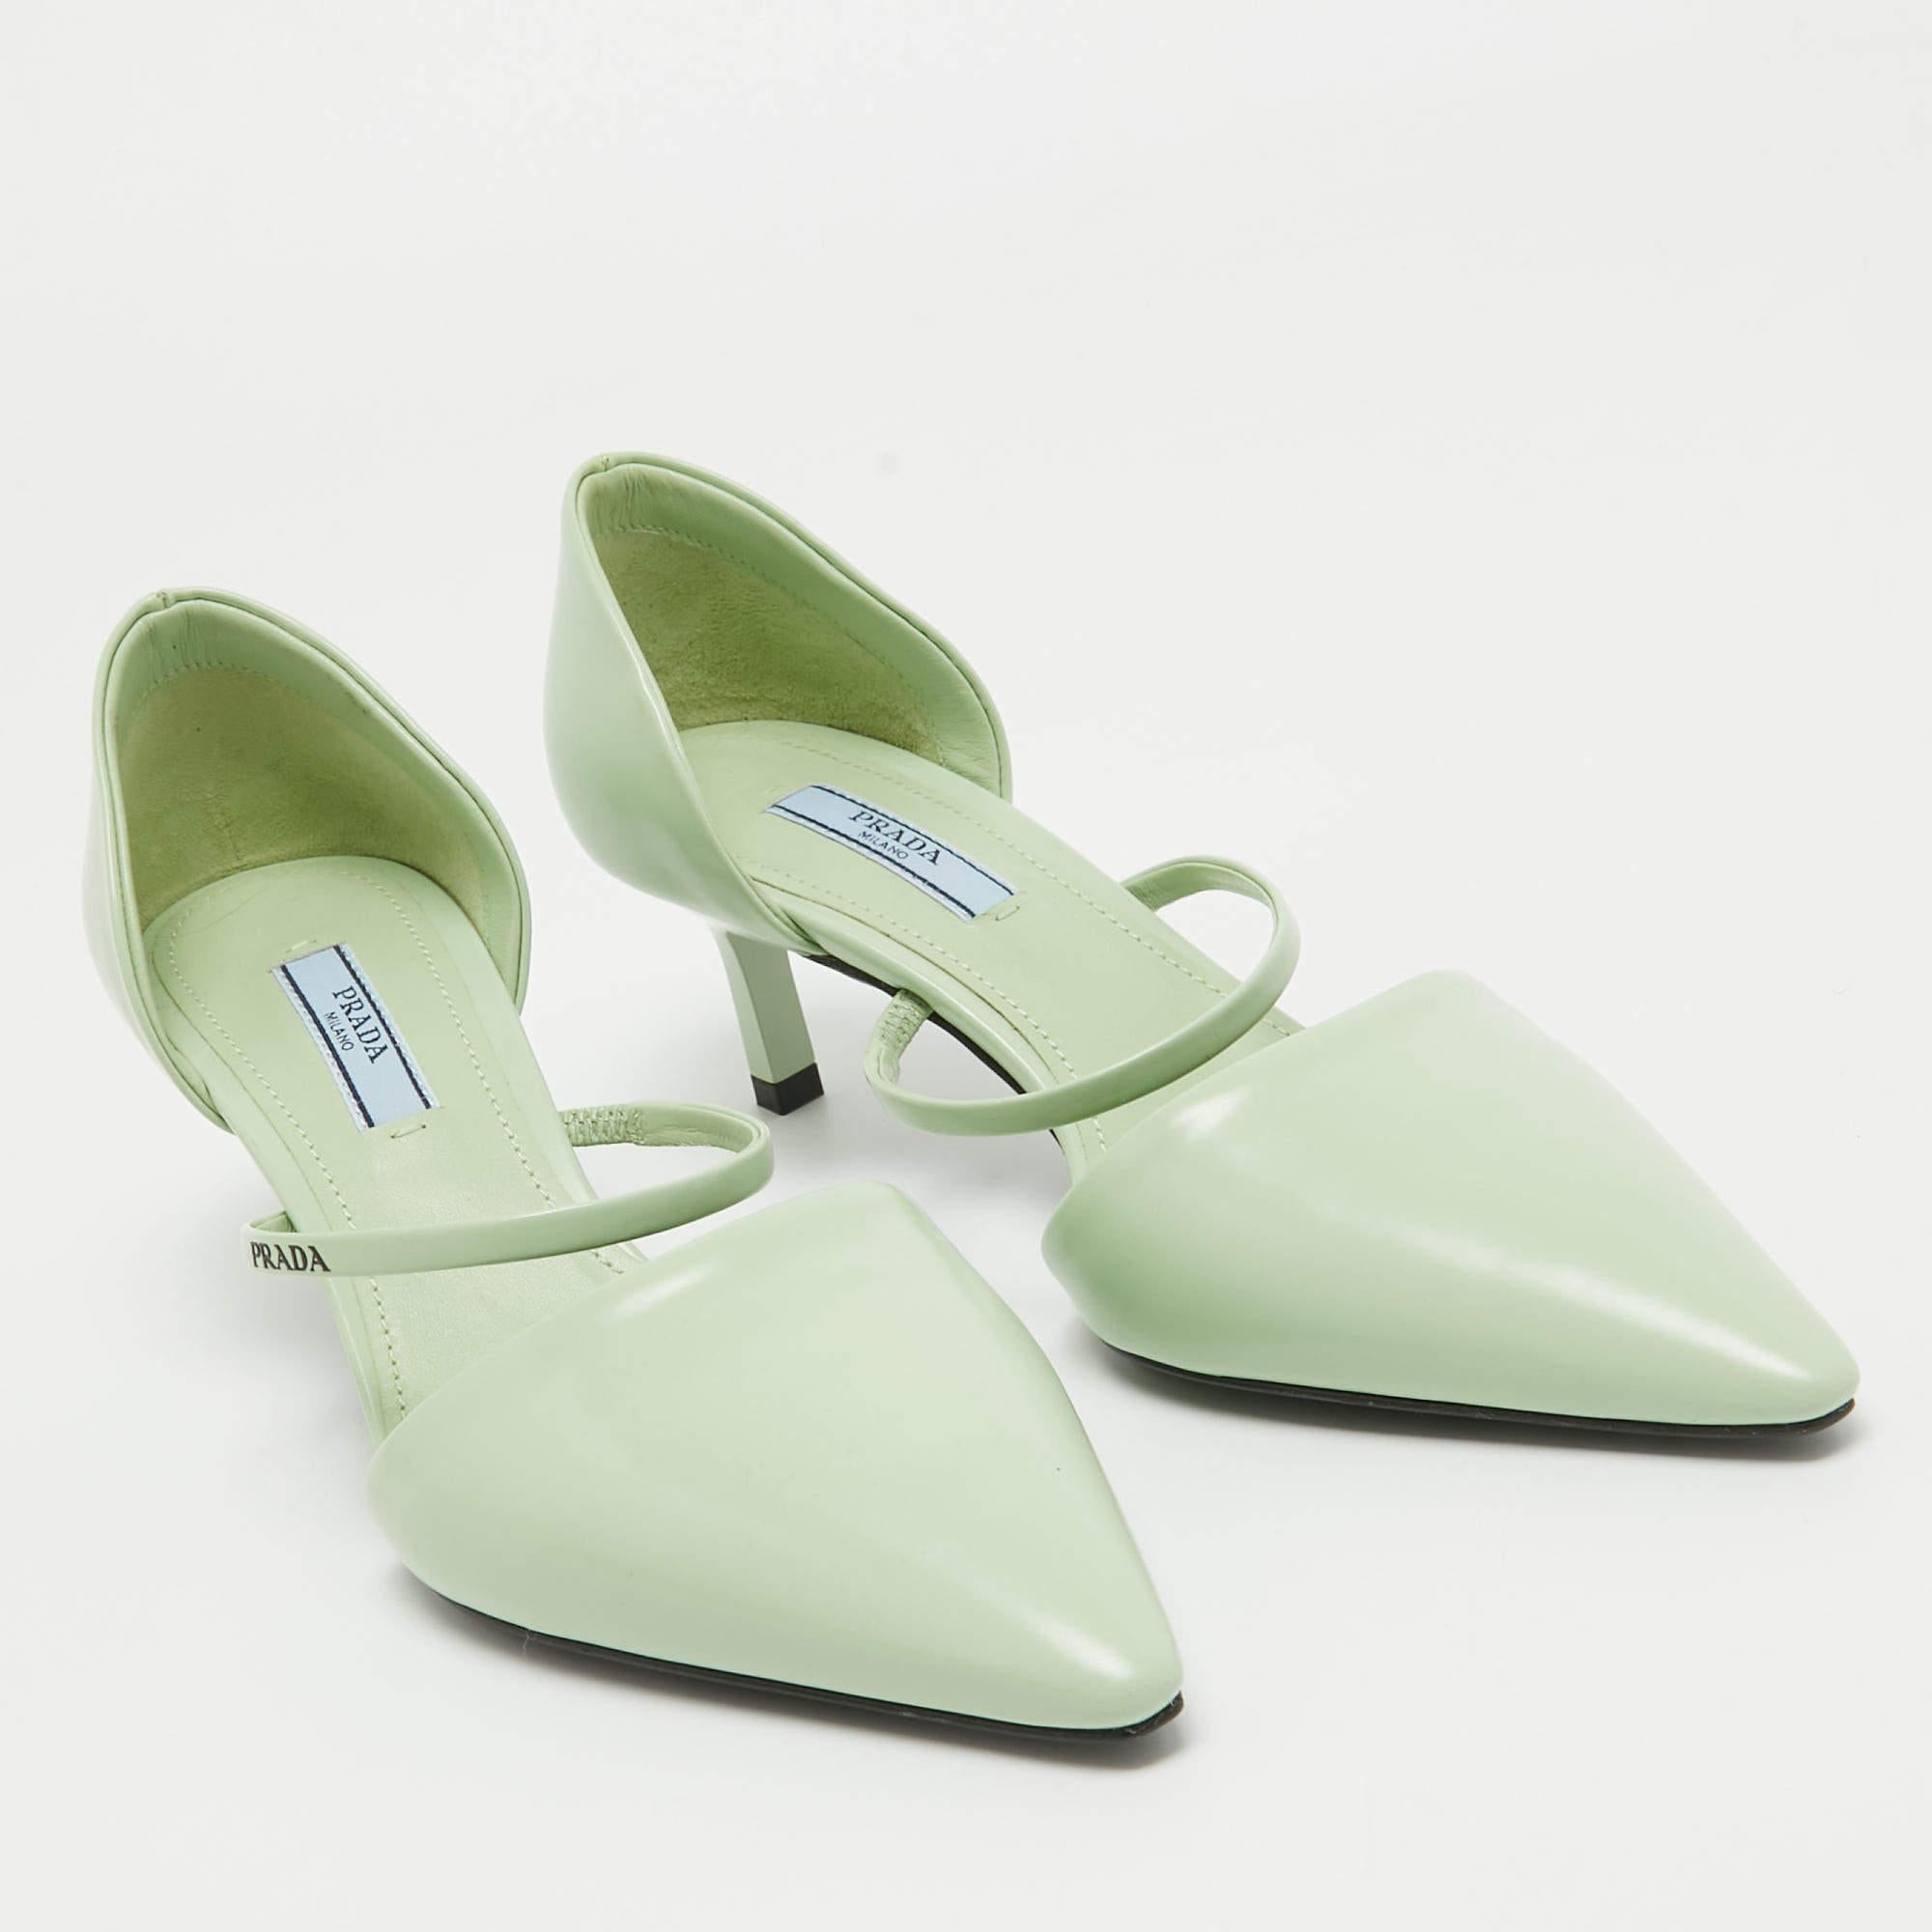 Gray Prada Mint Green Leather Mary Jane D'orsay Pumps Size 37